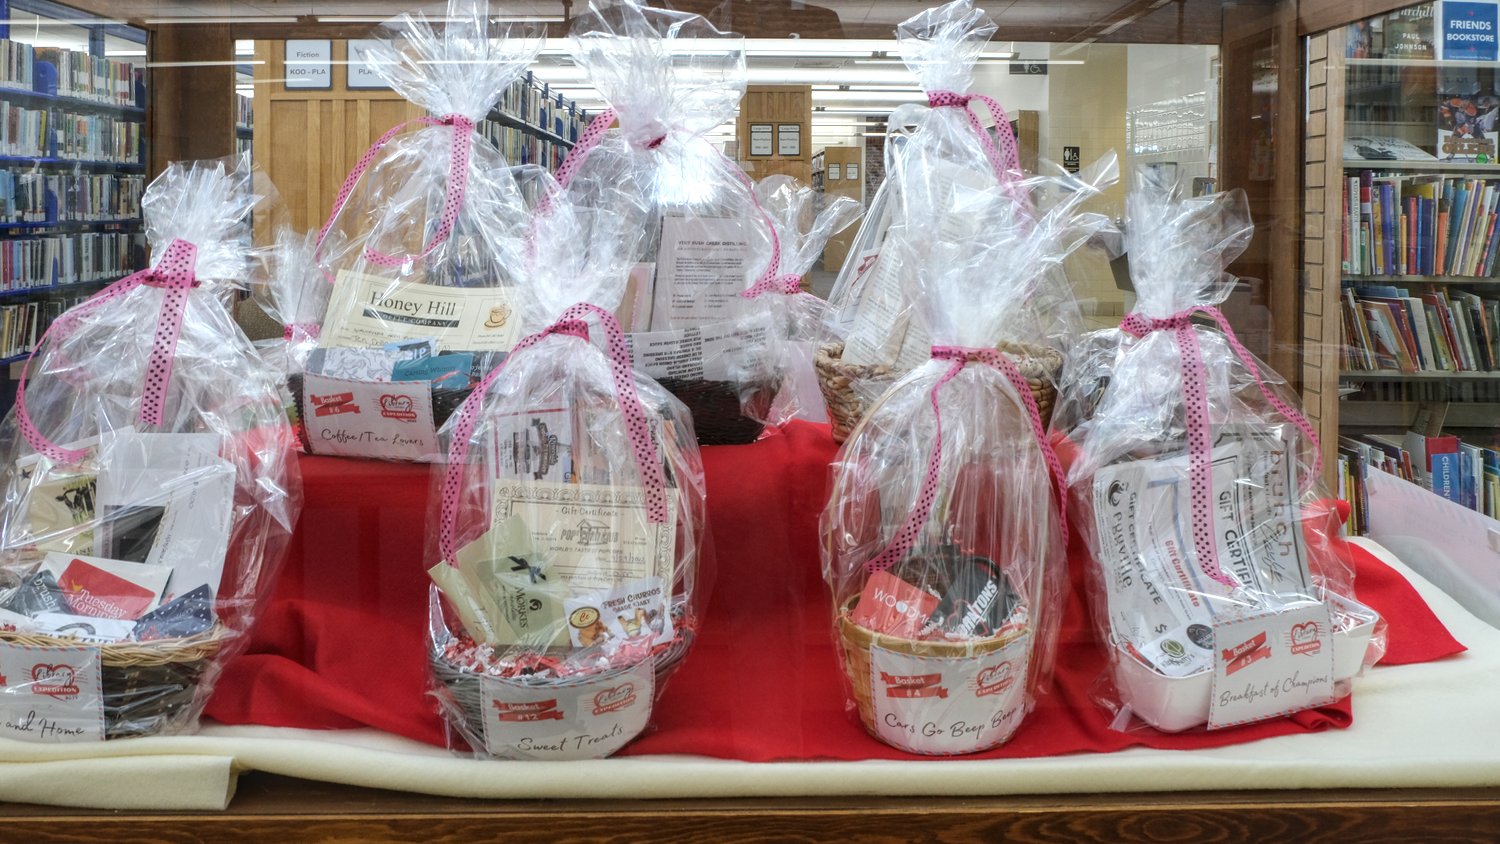 Library Lovers Expedition gift baskets on display.